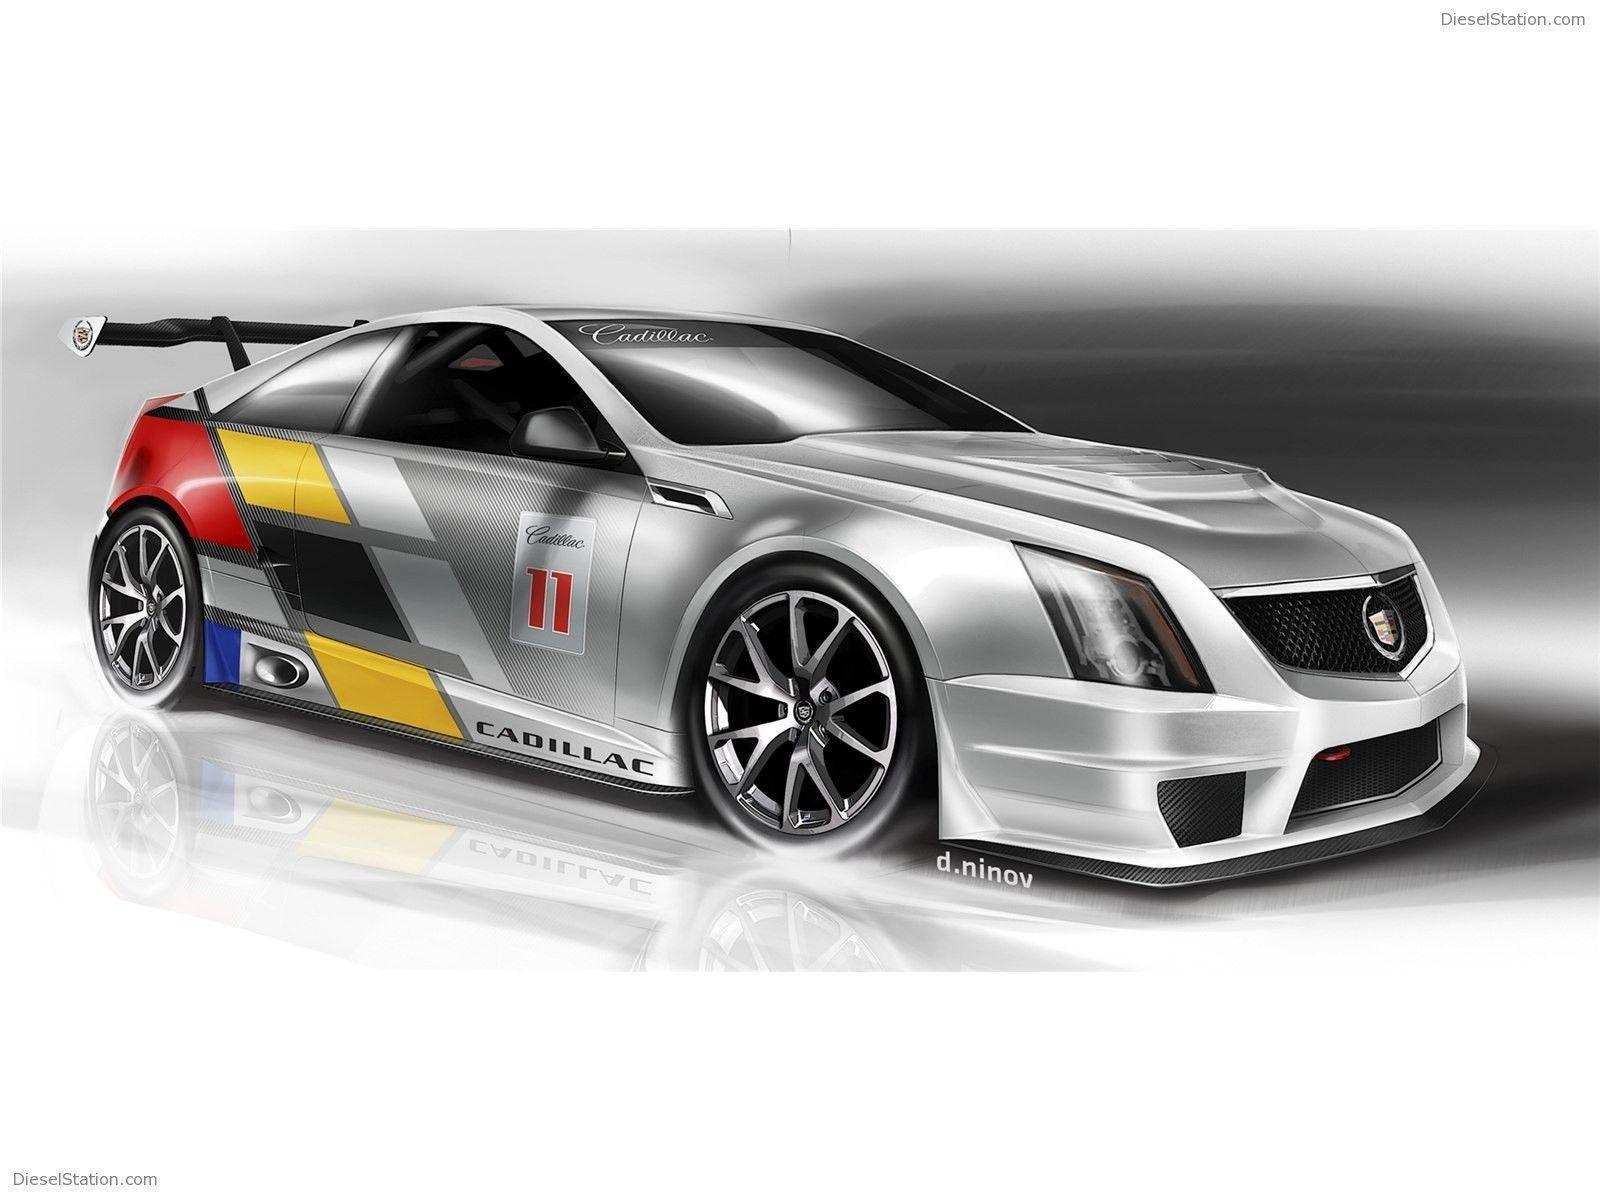 Cadillac CTS V Coupe Race Car Exotic Car Wallpapers of